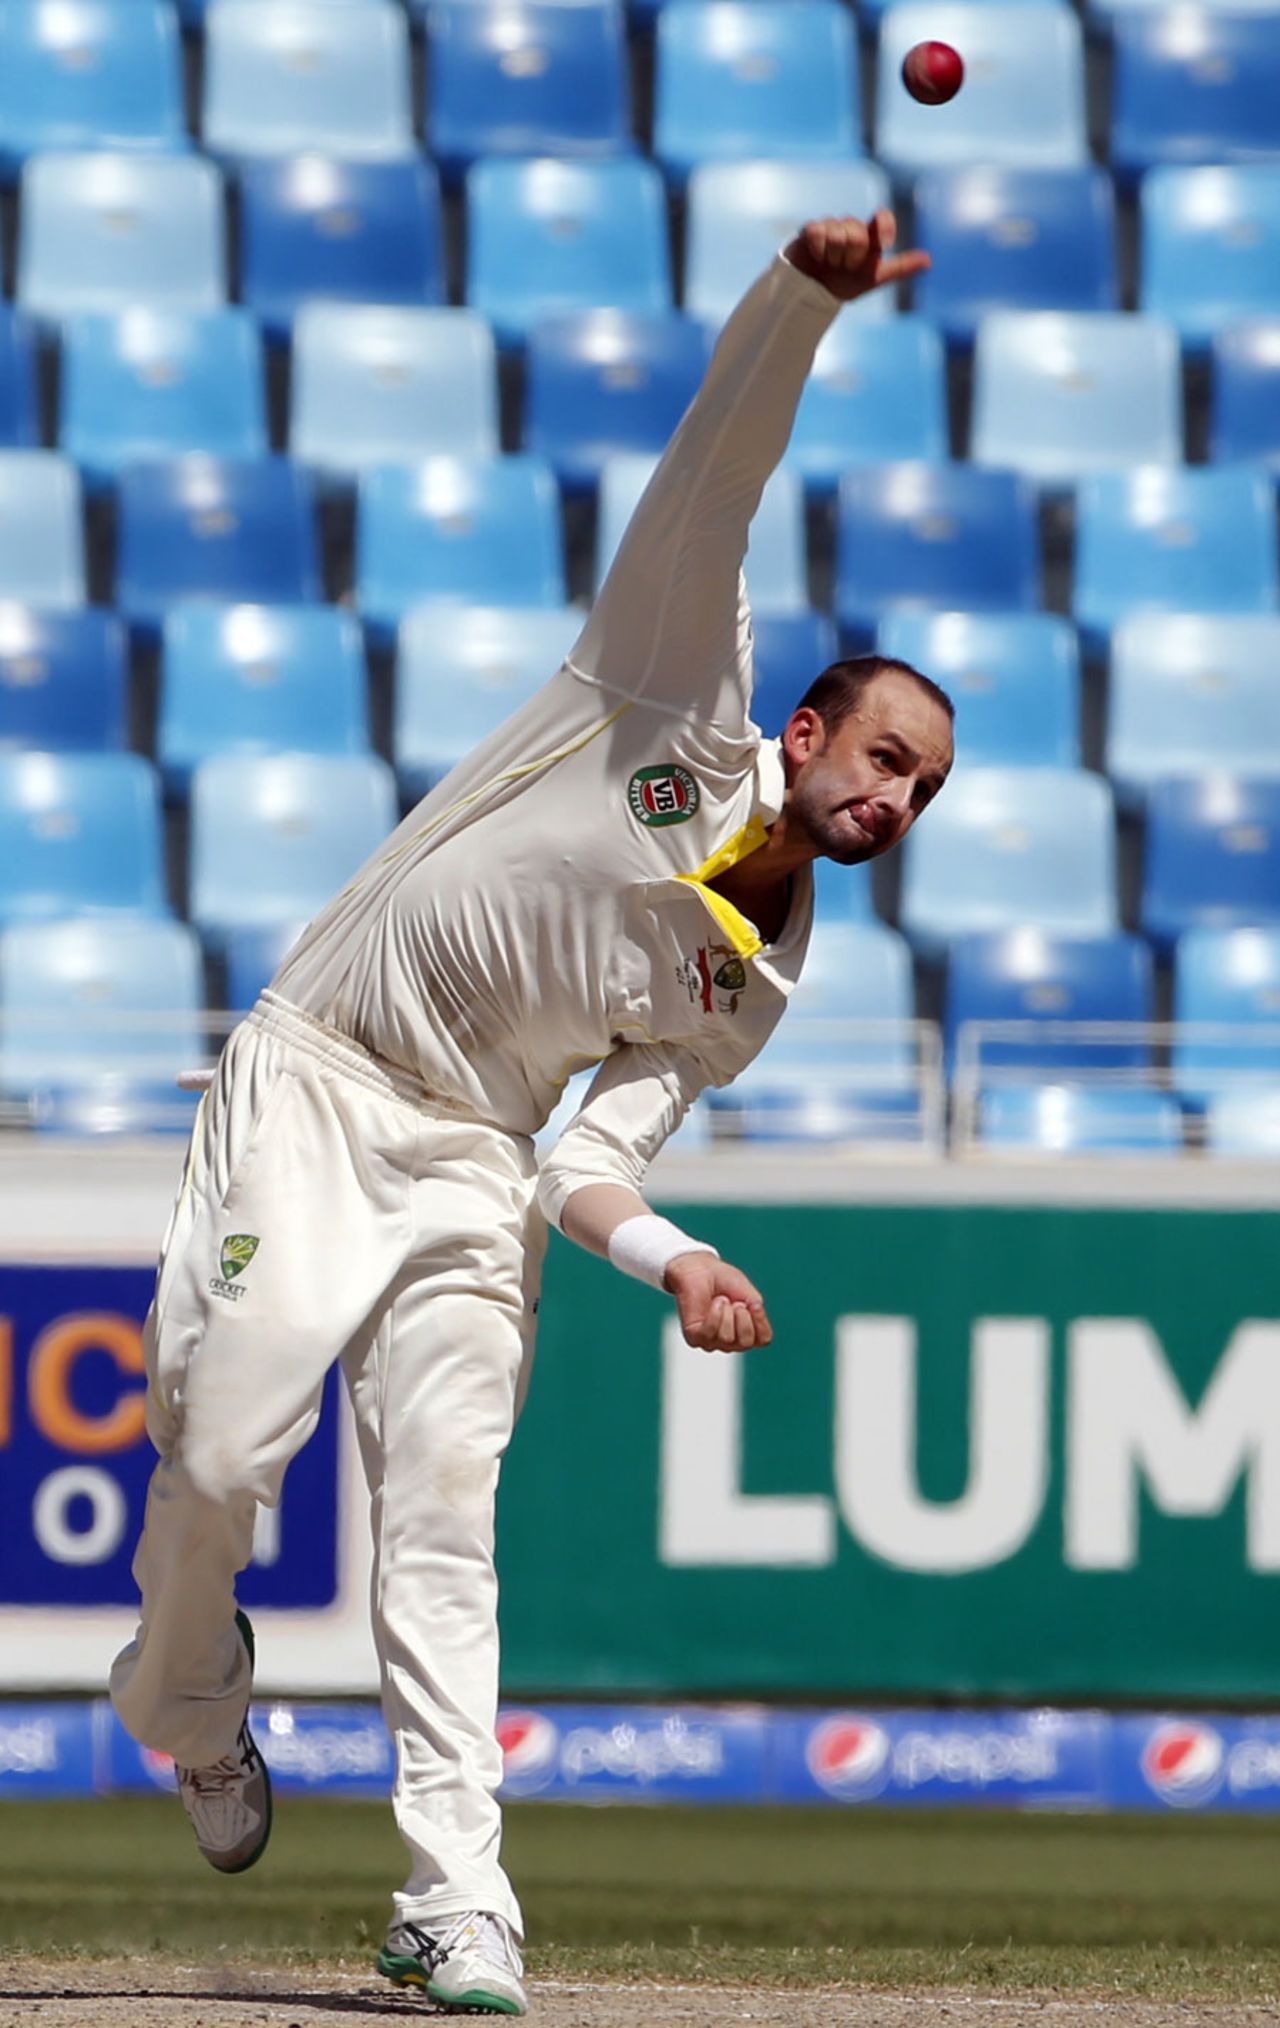 Nathan Lyon hurls in a delivery, Pakistan v Australia, 1st Test, Dubai, 2nd day, October 23, 2014